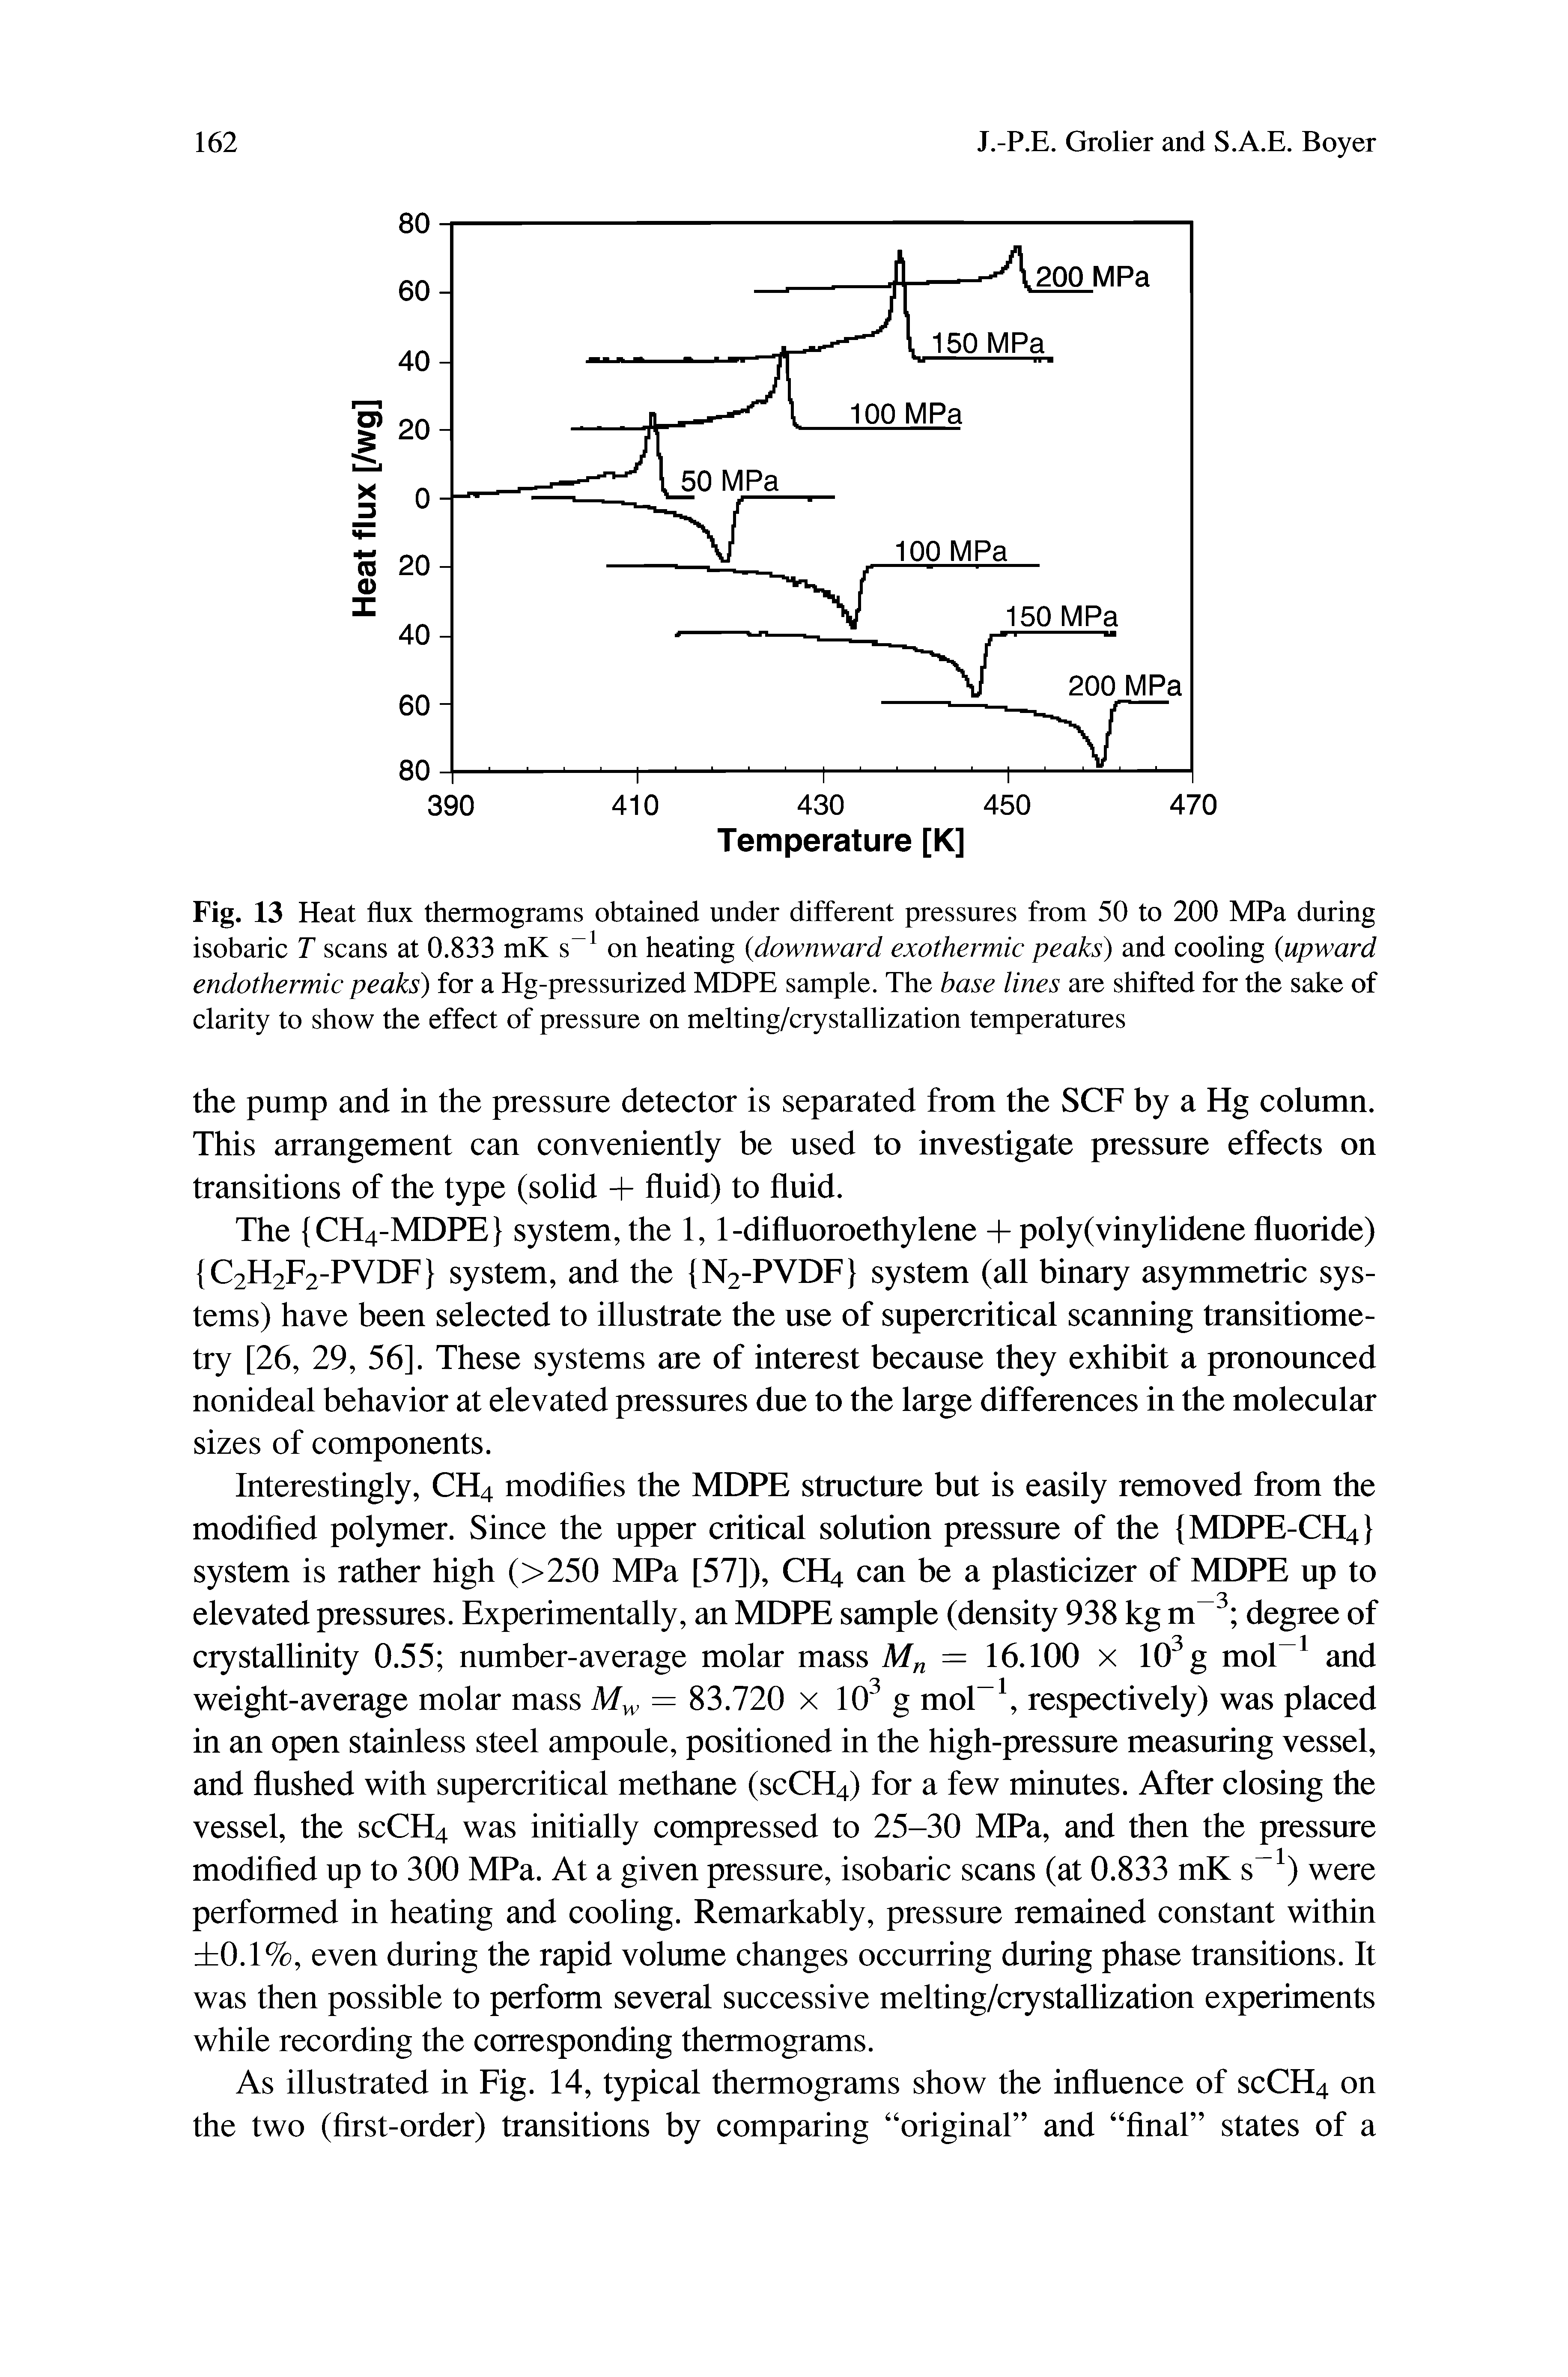 Fig. 13 Heat flux thermograms obtained under different pressures from 50 to 200 MPa during isobaric T scans at 0.833 mK s on heating downward exothermic peaks) and cooling upward endothermic peaks) for a Hg-pressurized MDPE sample. The base lines are shifted for the sake of clarity to show the effect of pressure on melting/crystallization temperatures...